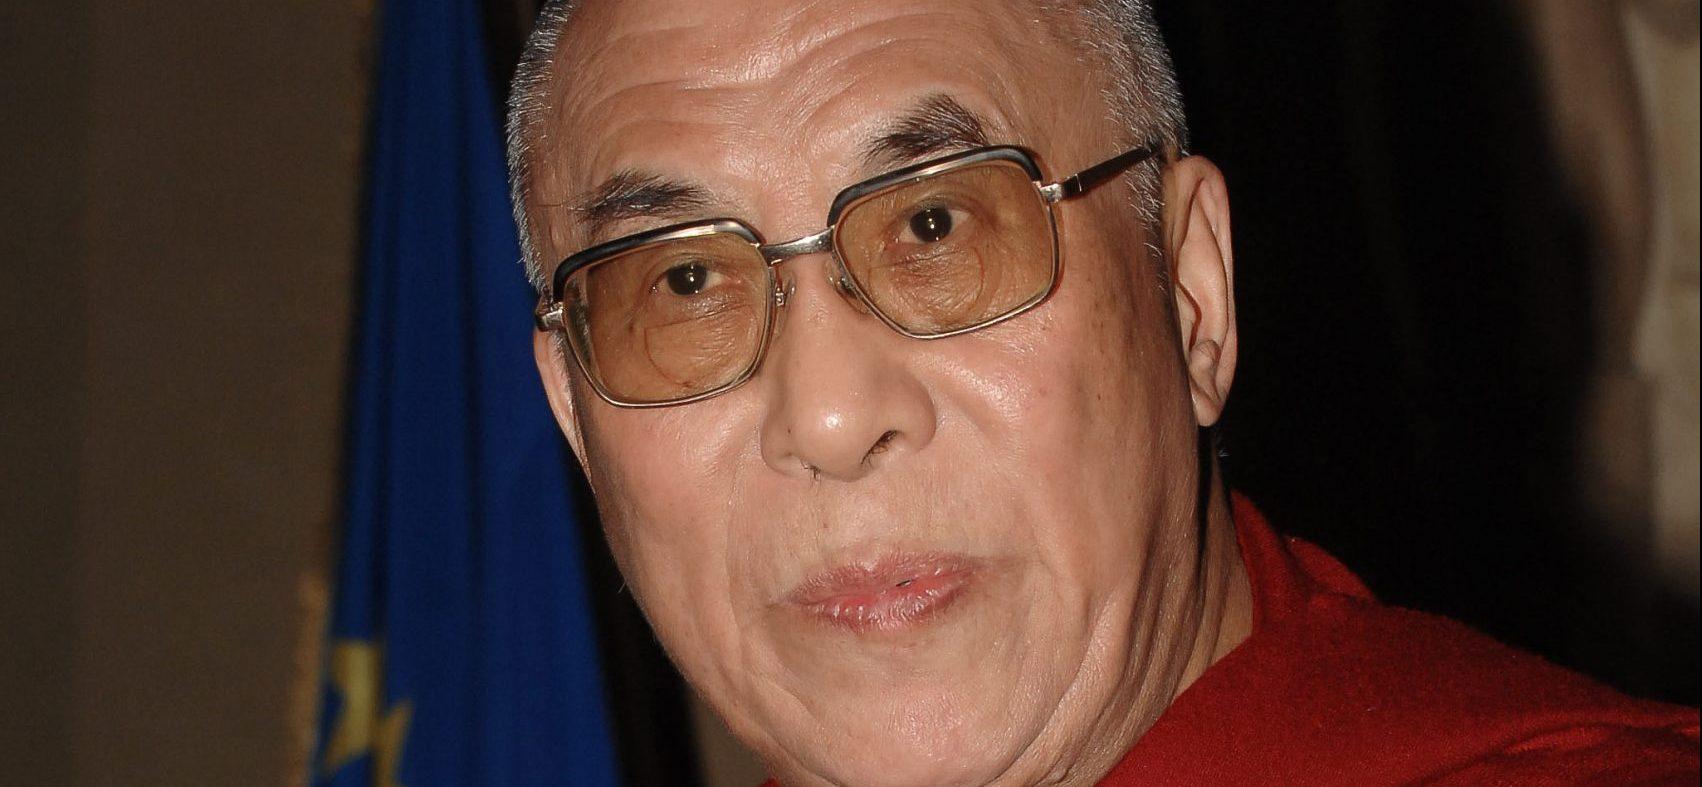 Apology Not Accepted! Dalai Lama Slammed For Unforgivable ‘Pedophile Behavior’ With Young Boy